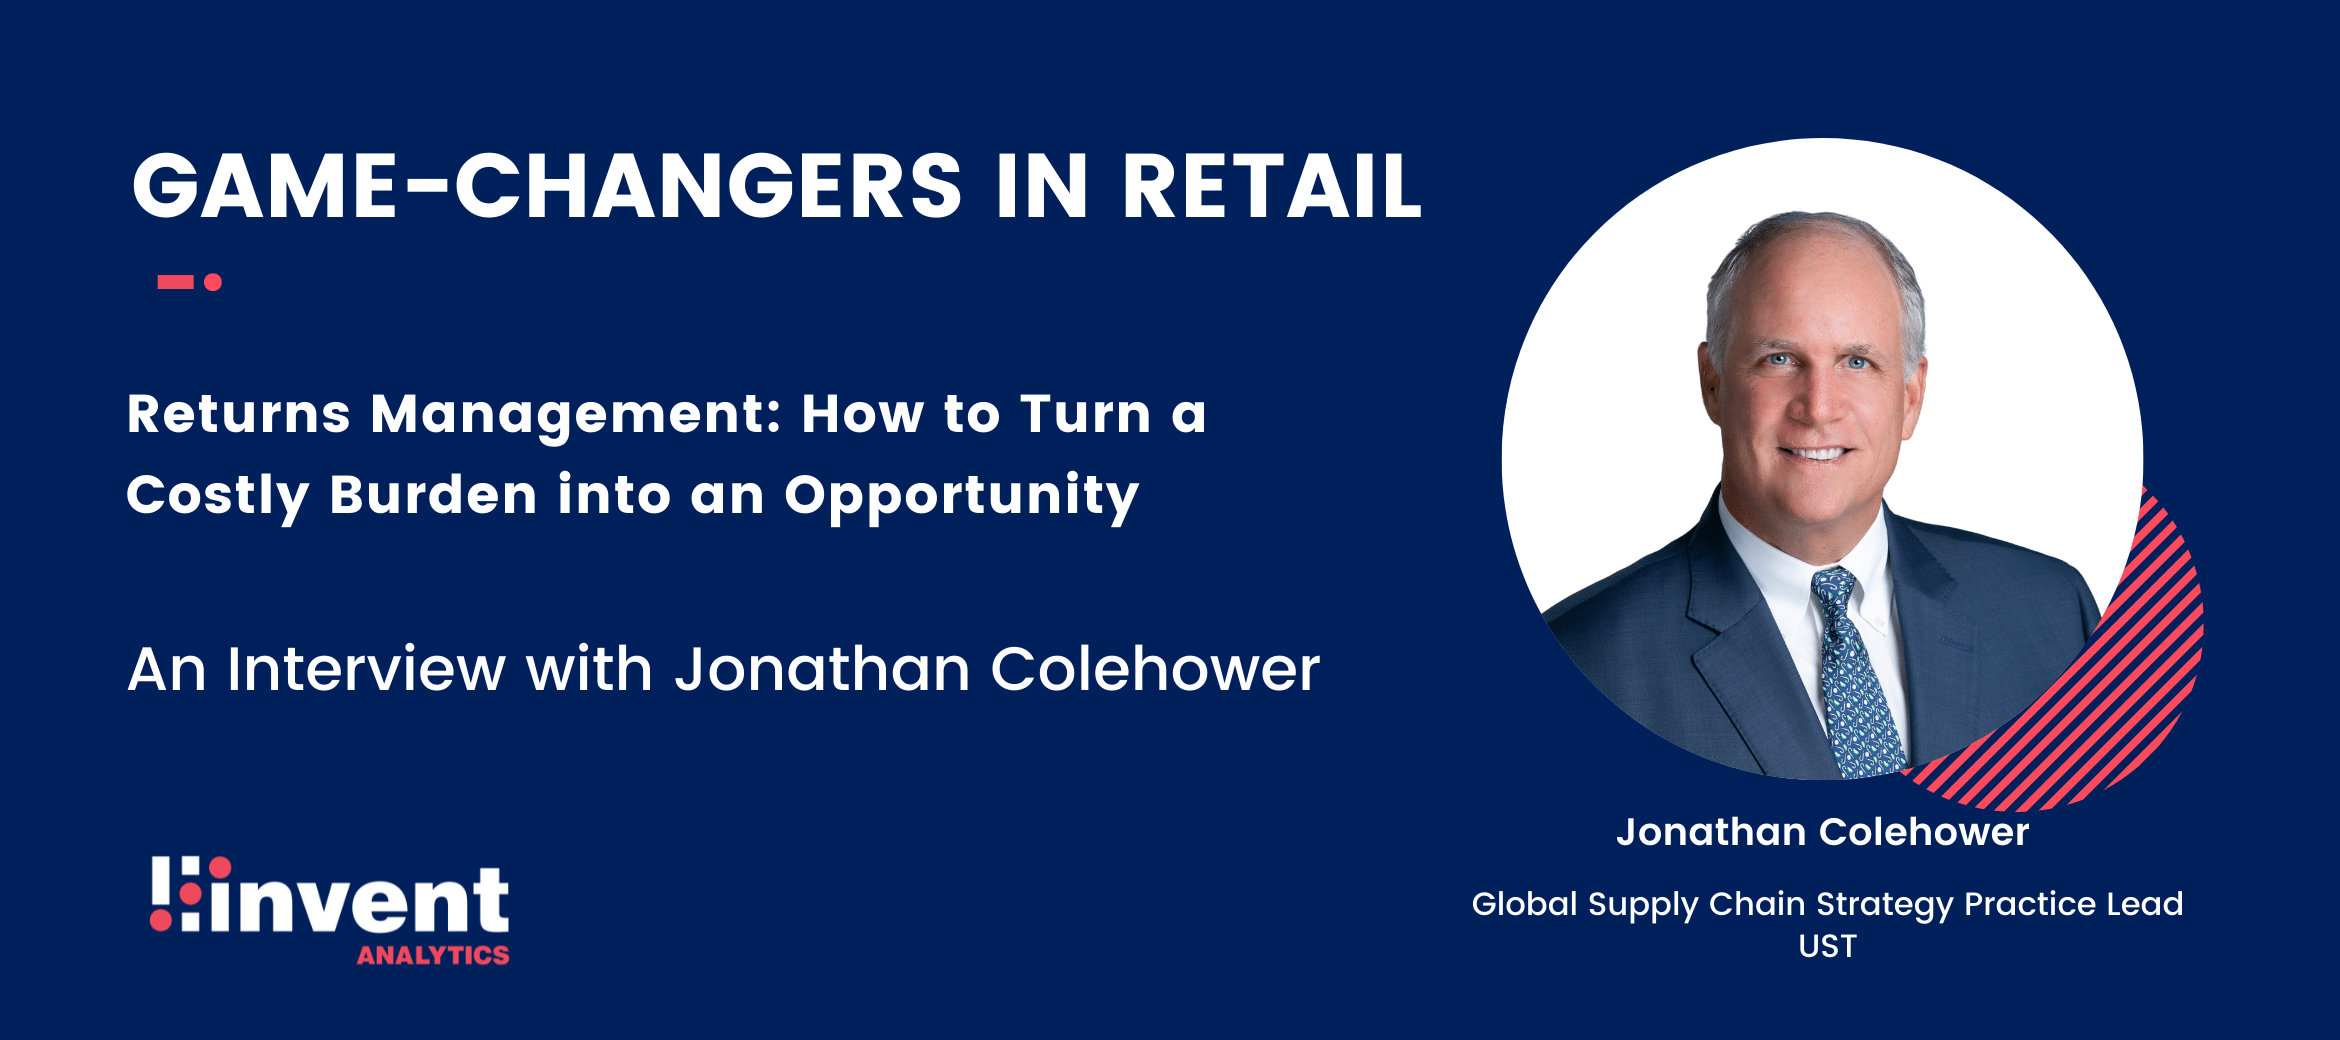 game changers in retail jonathan colehower